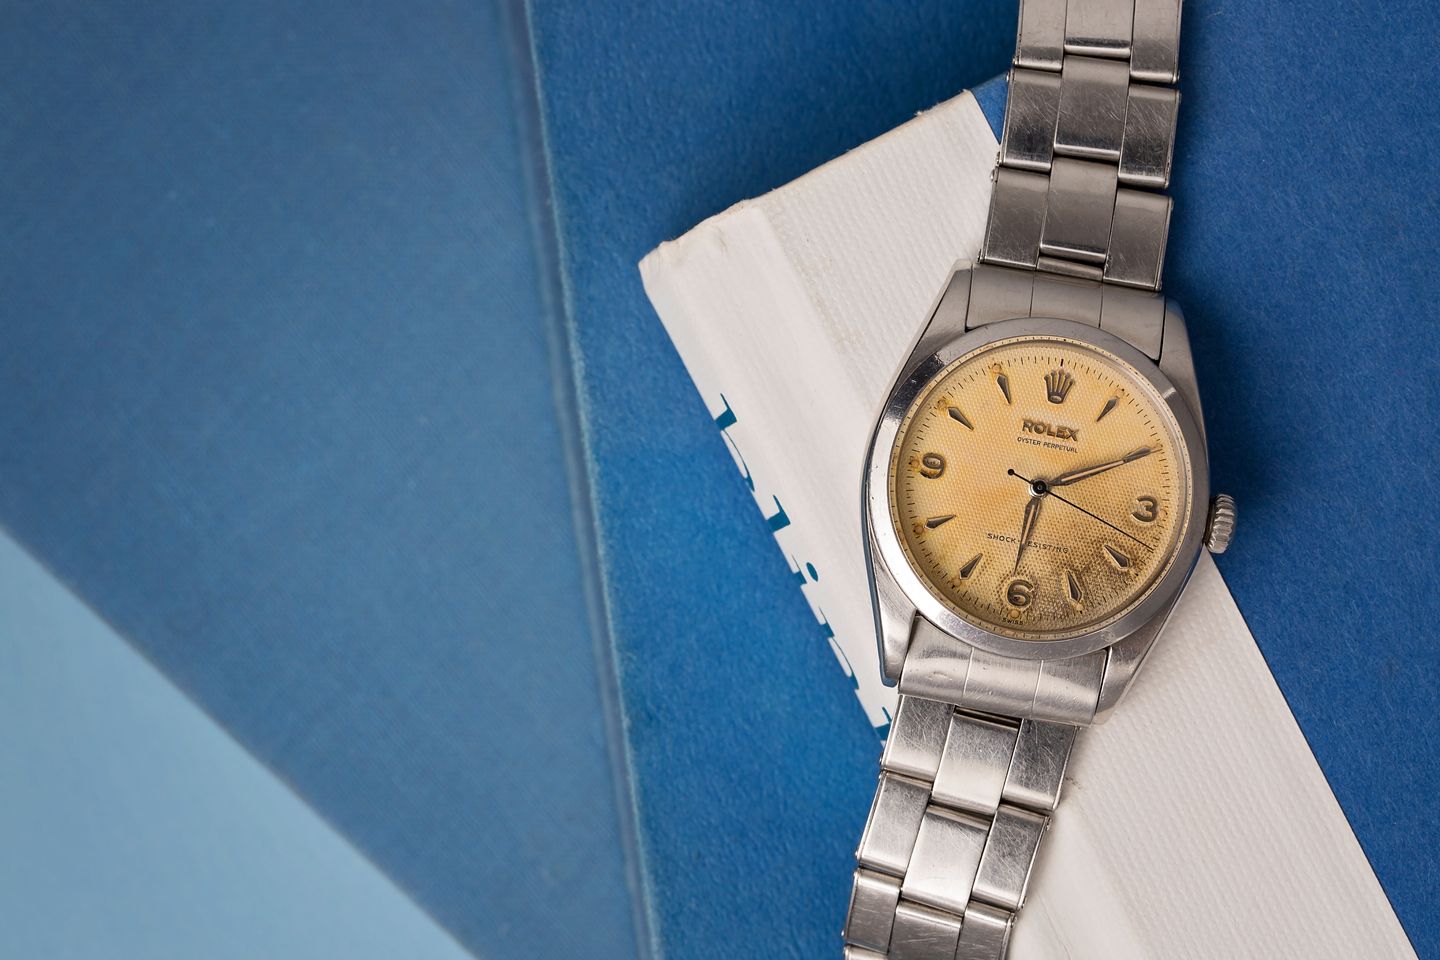 Rolex Oyster Perpetual Watch Facts for Collectors